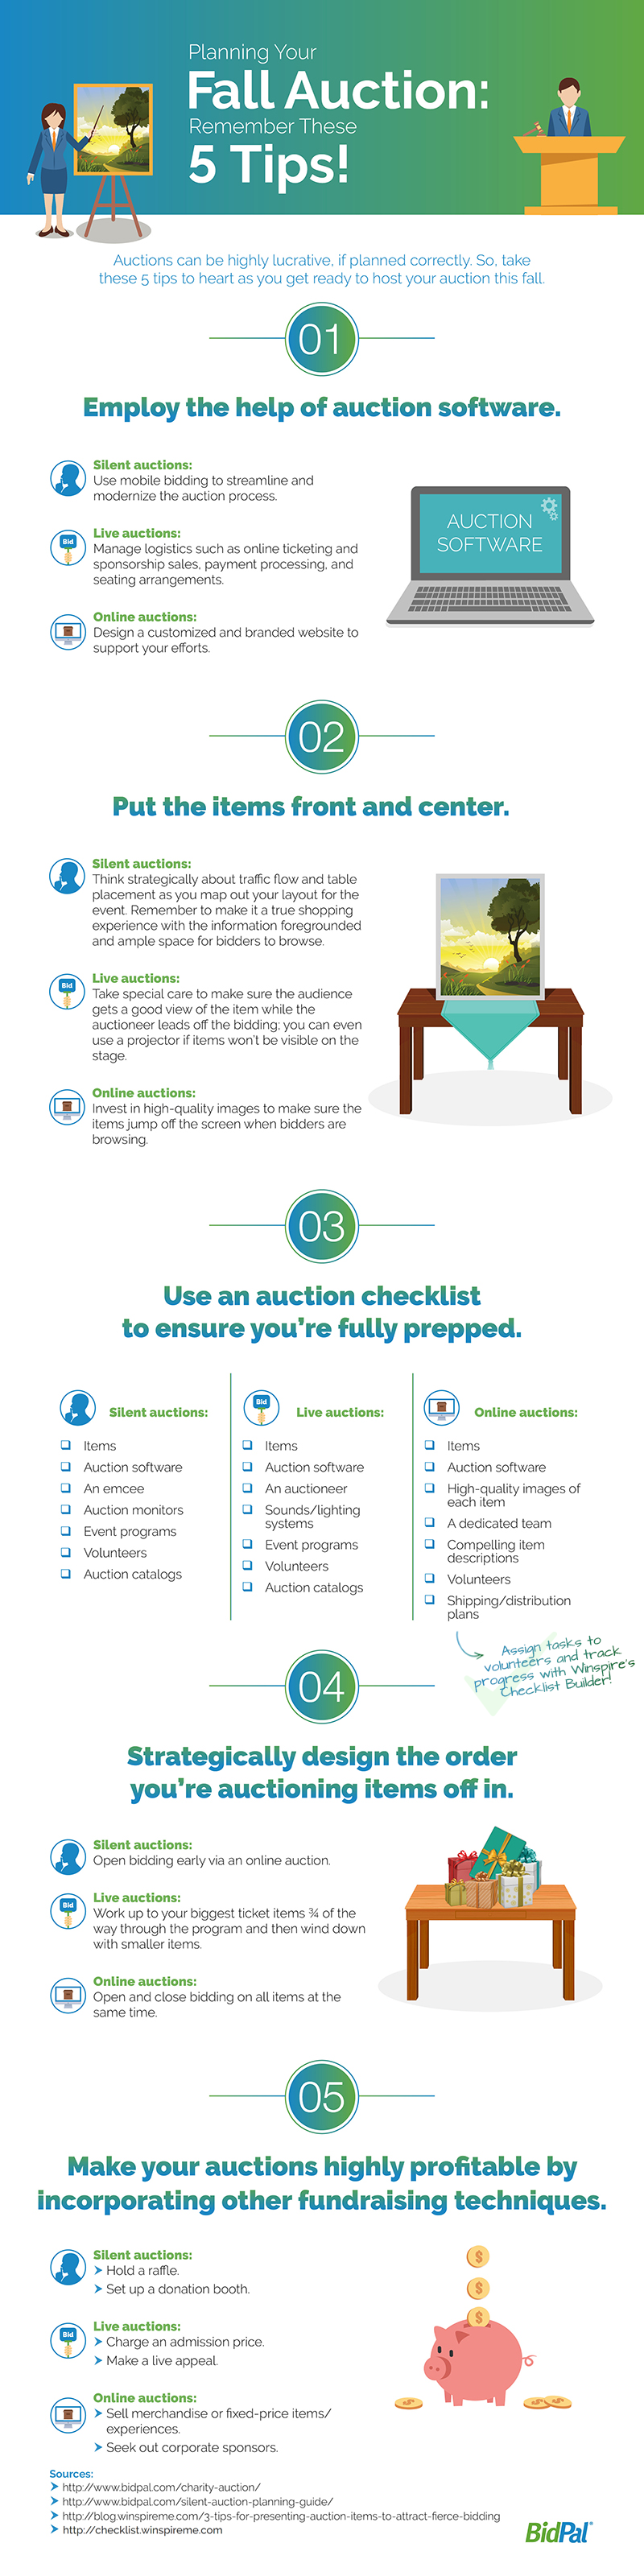 Fall-Auction-Tips---BidPal-Infographic.png